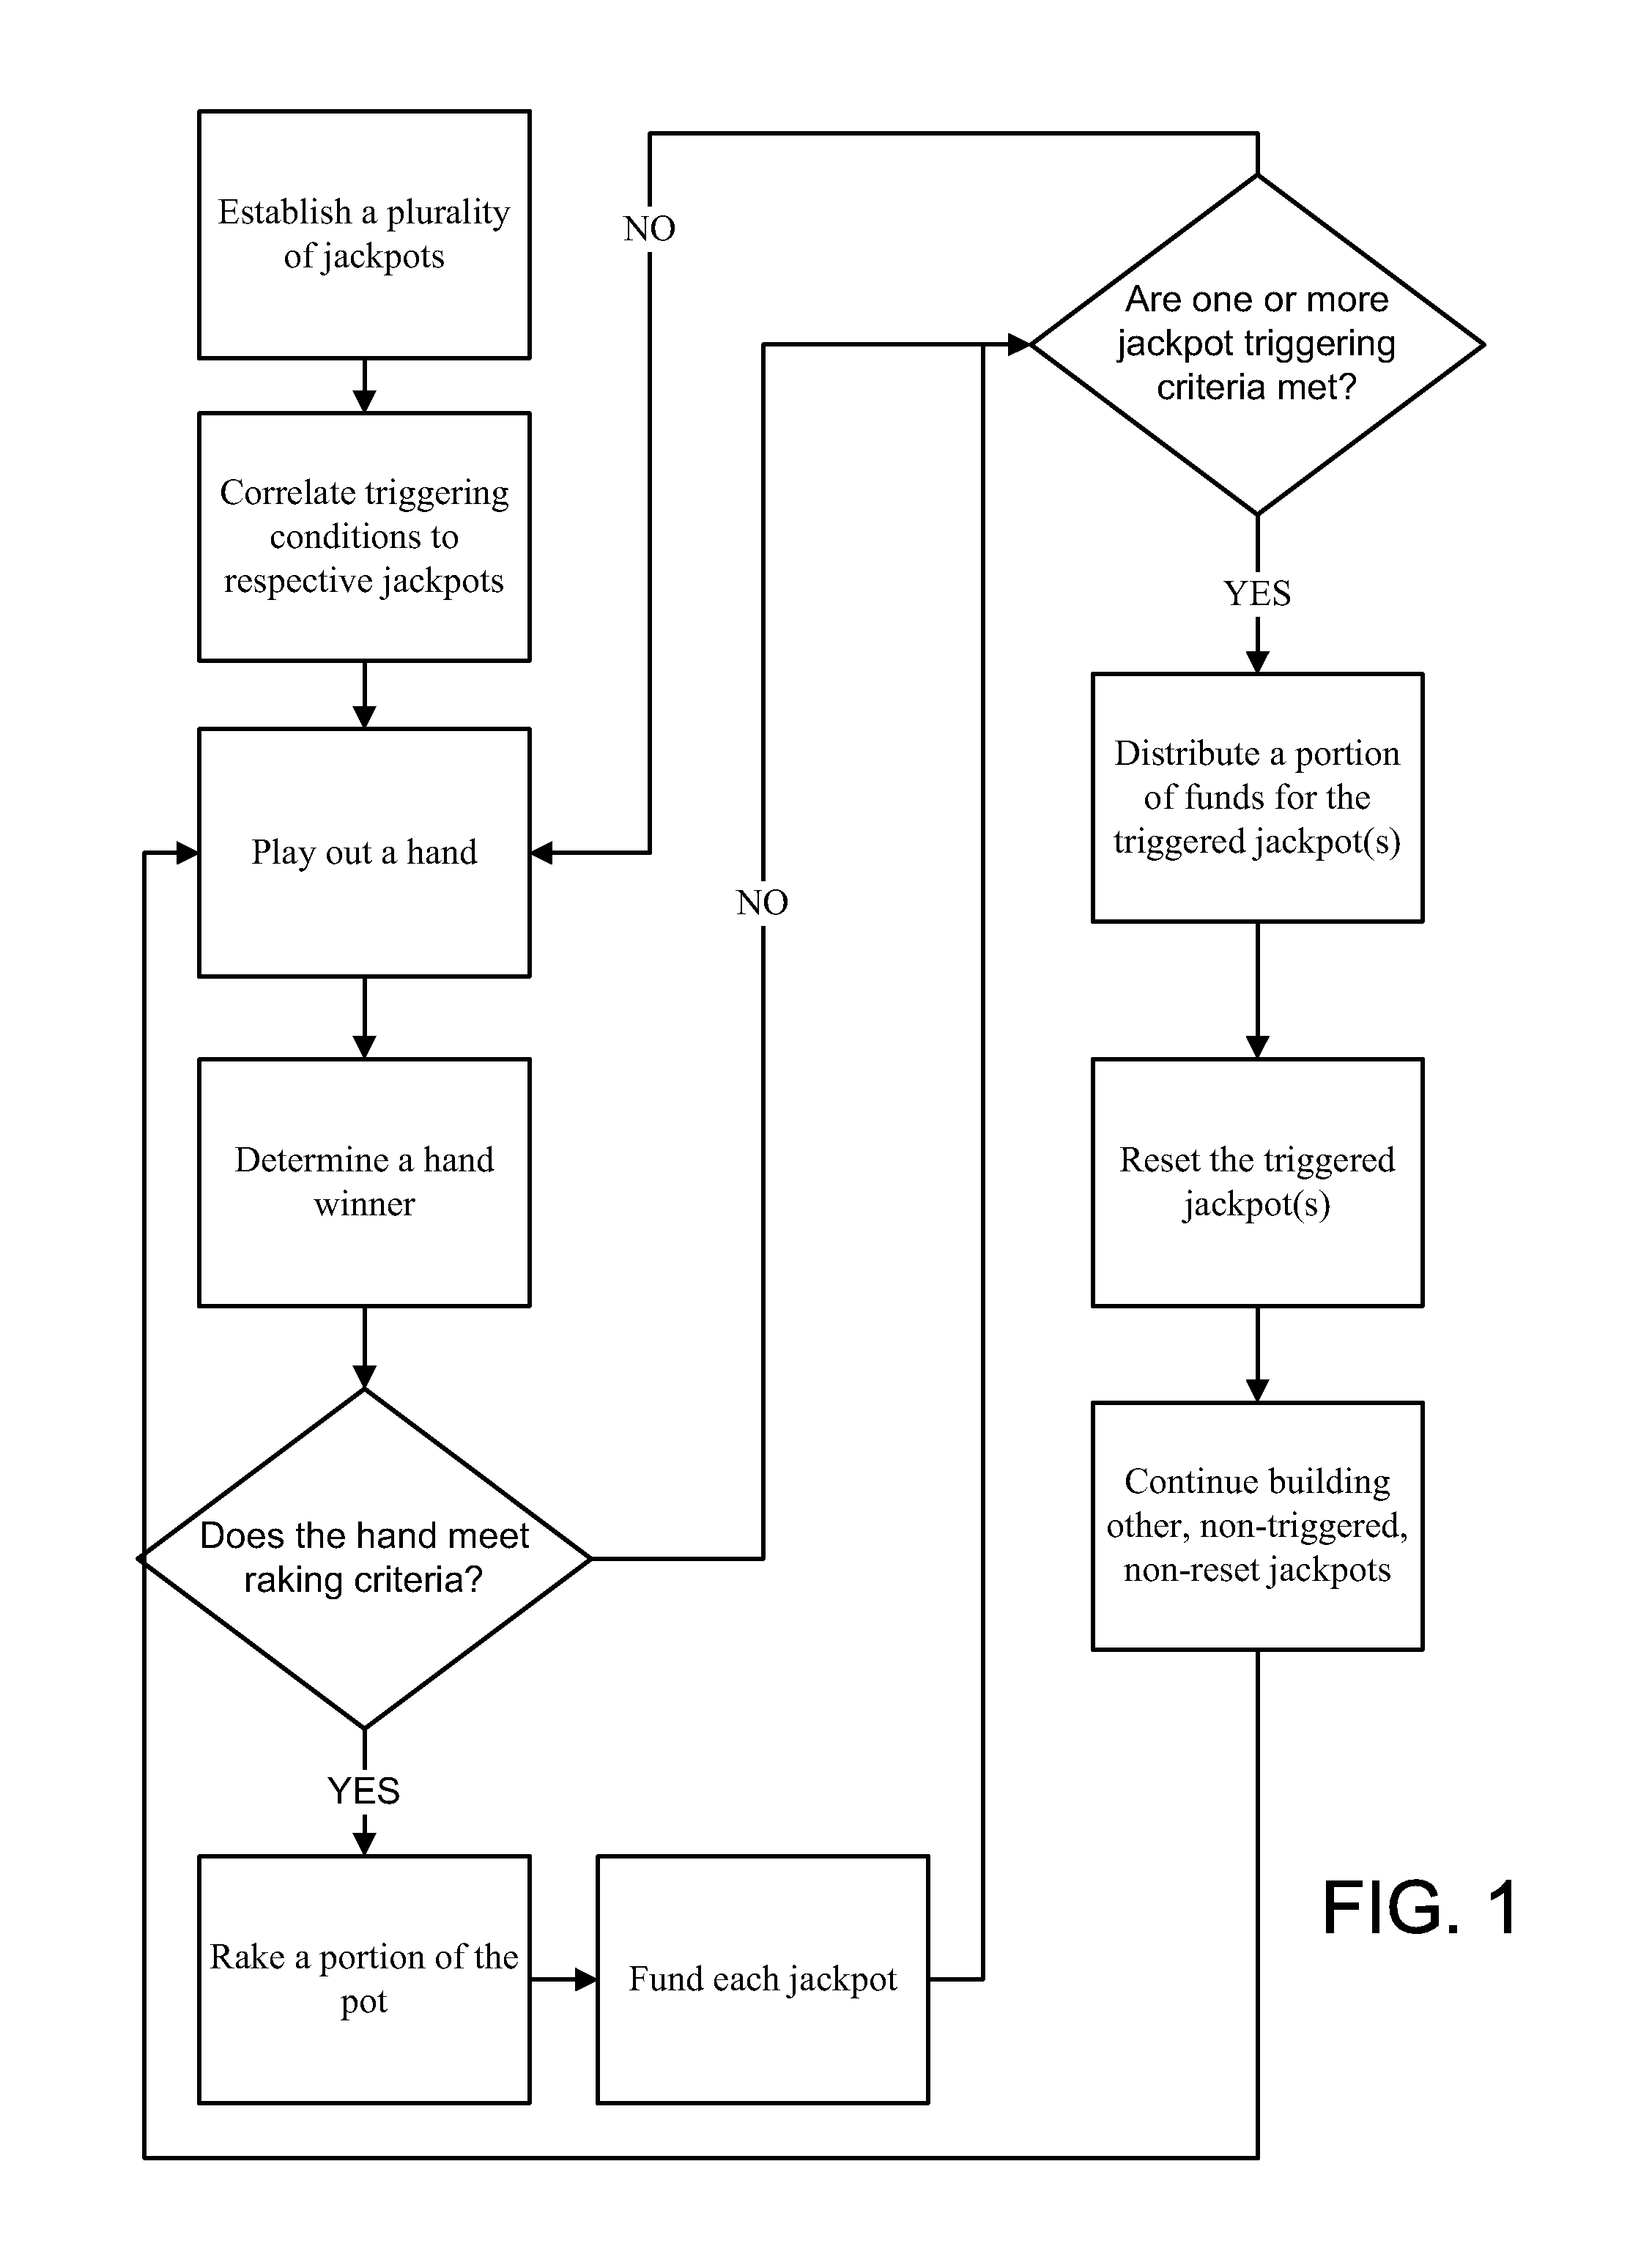 System and Method for Generating, Funding, and Distributing Multiple Jackpots